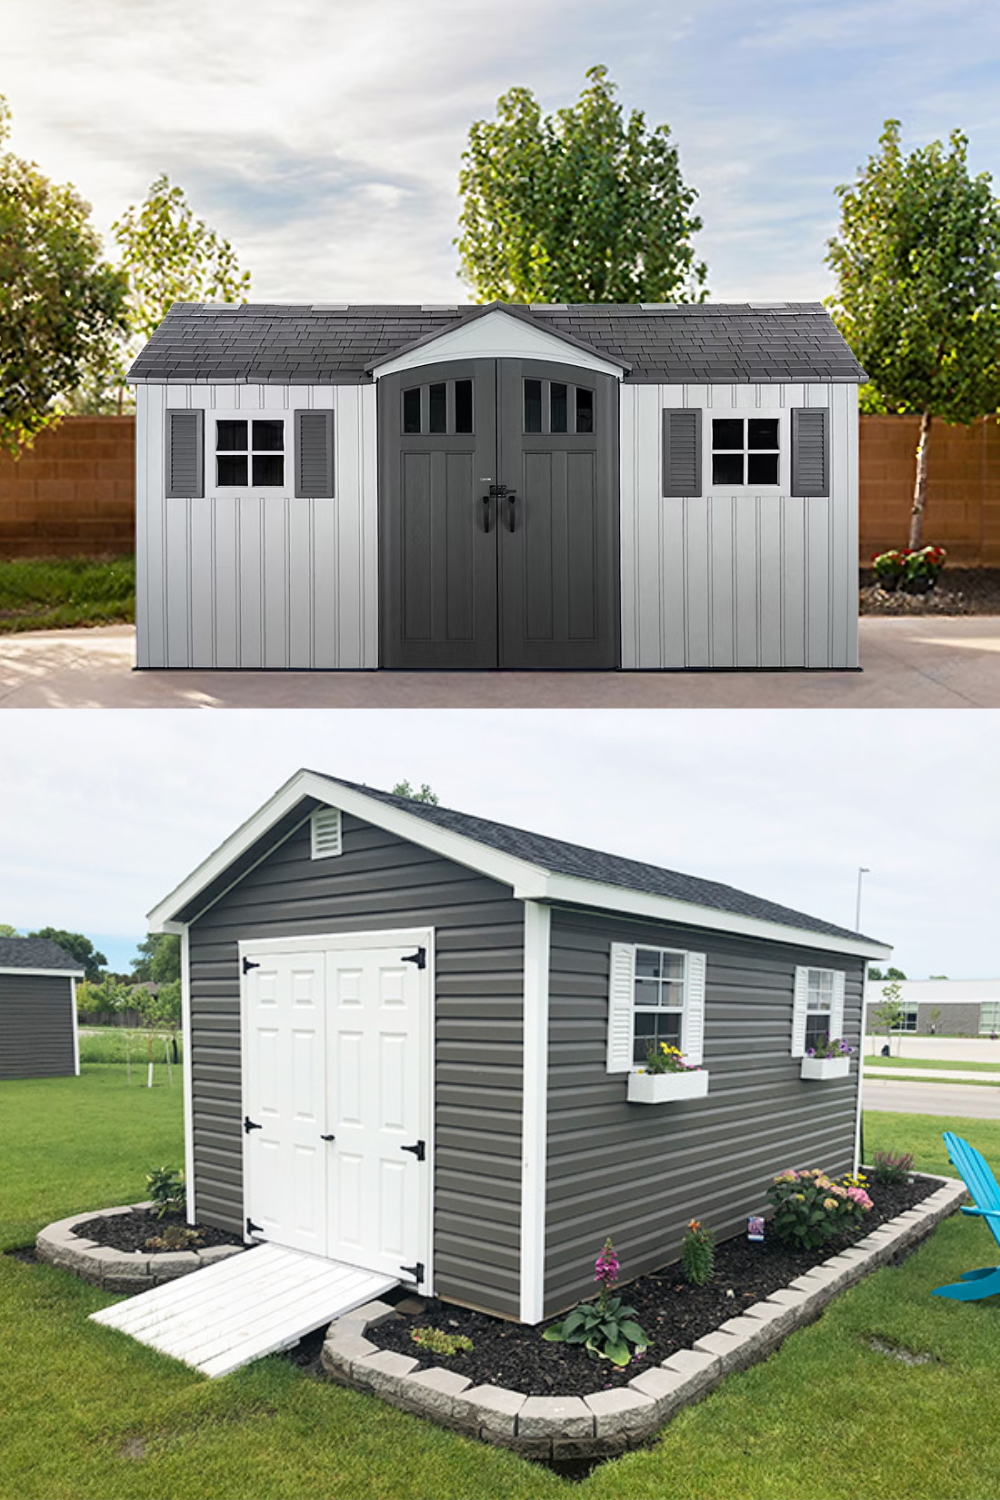 Rubbermaid Storage Sheds: The Ultimate Solution for Outdoor Organization